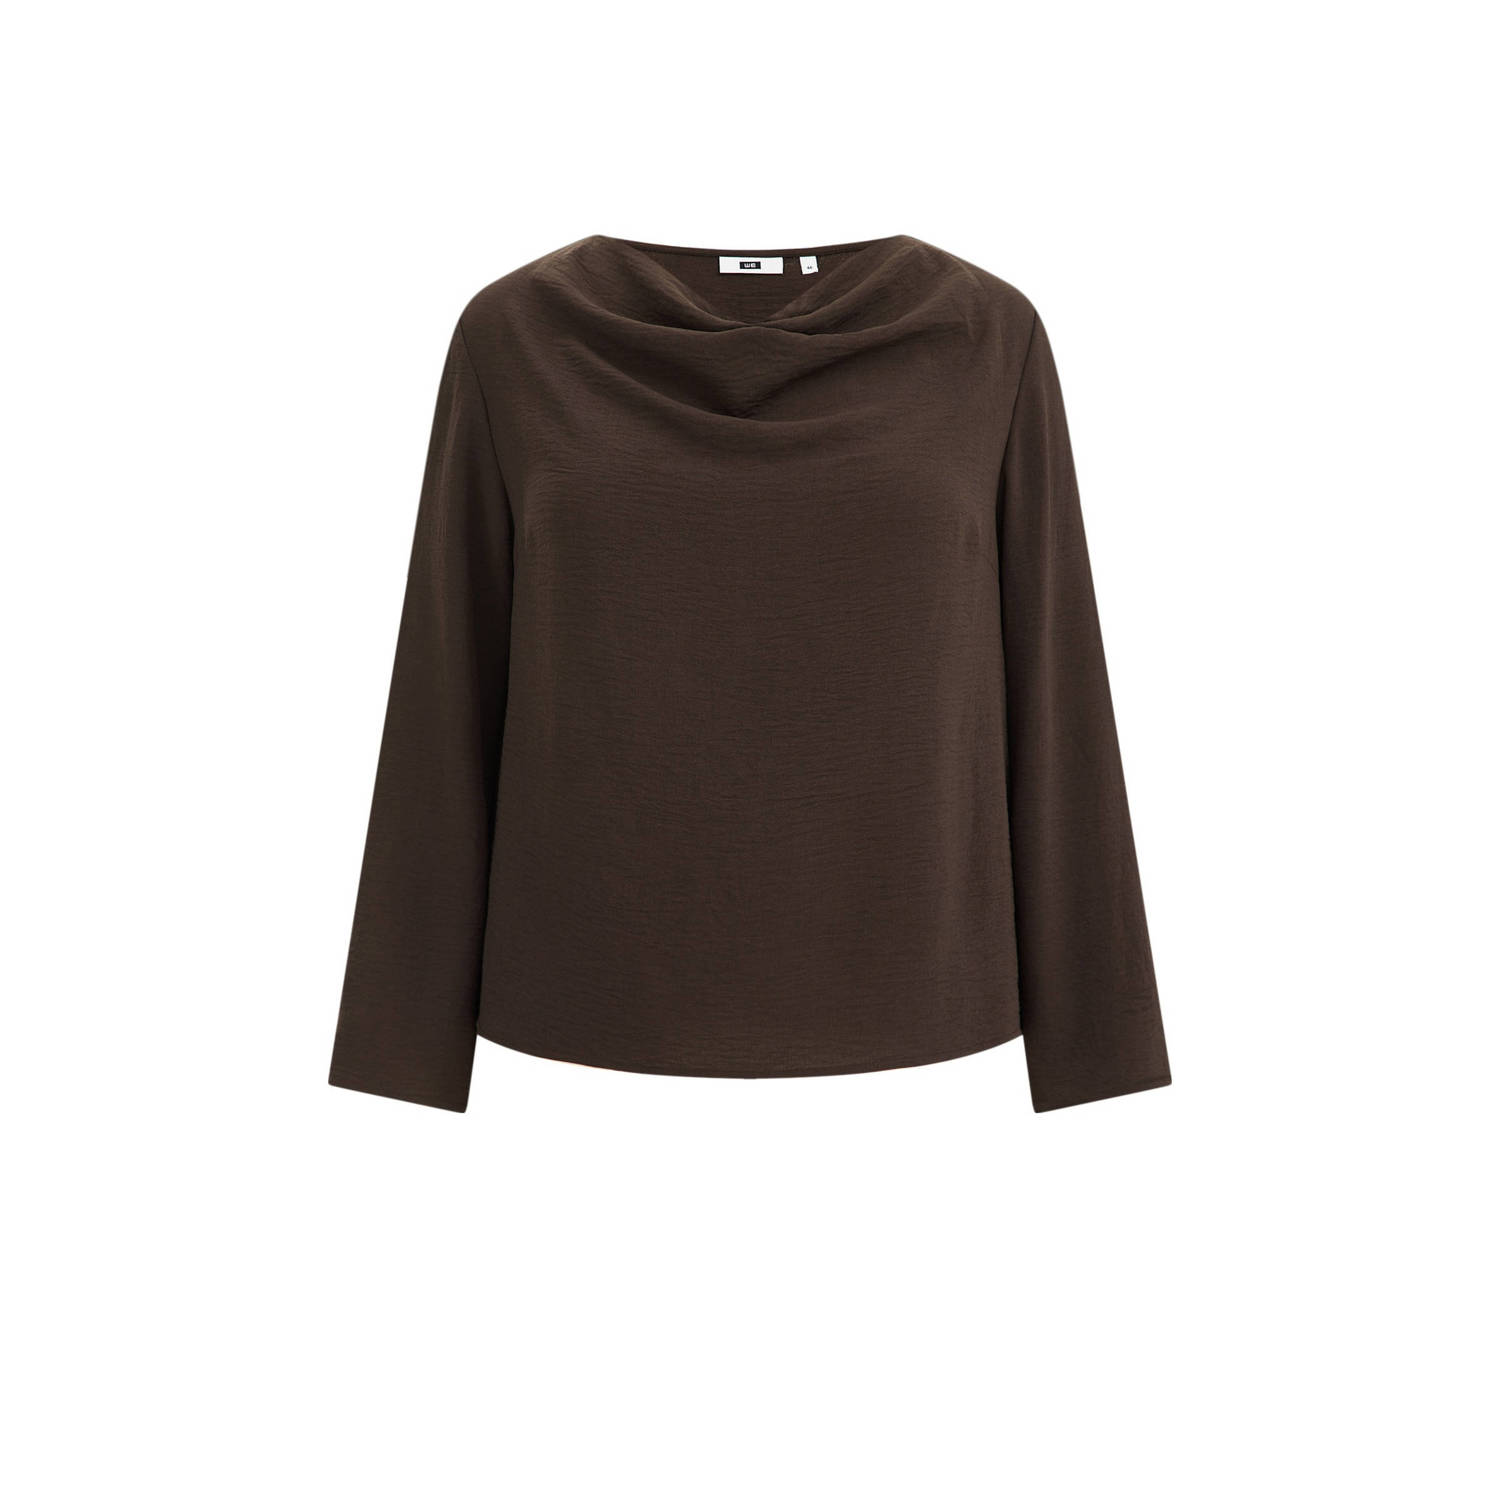 WE Fashion Curve blousetop van gerecycled polyester bruin